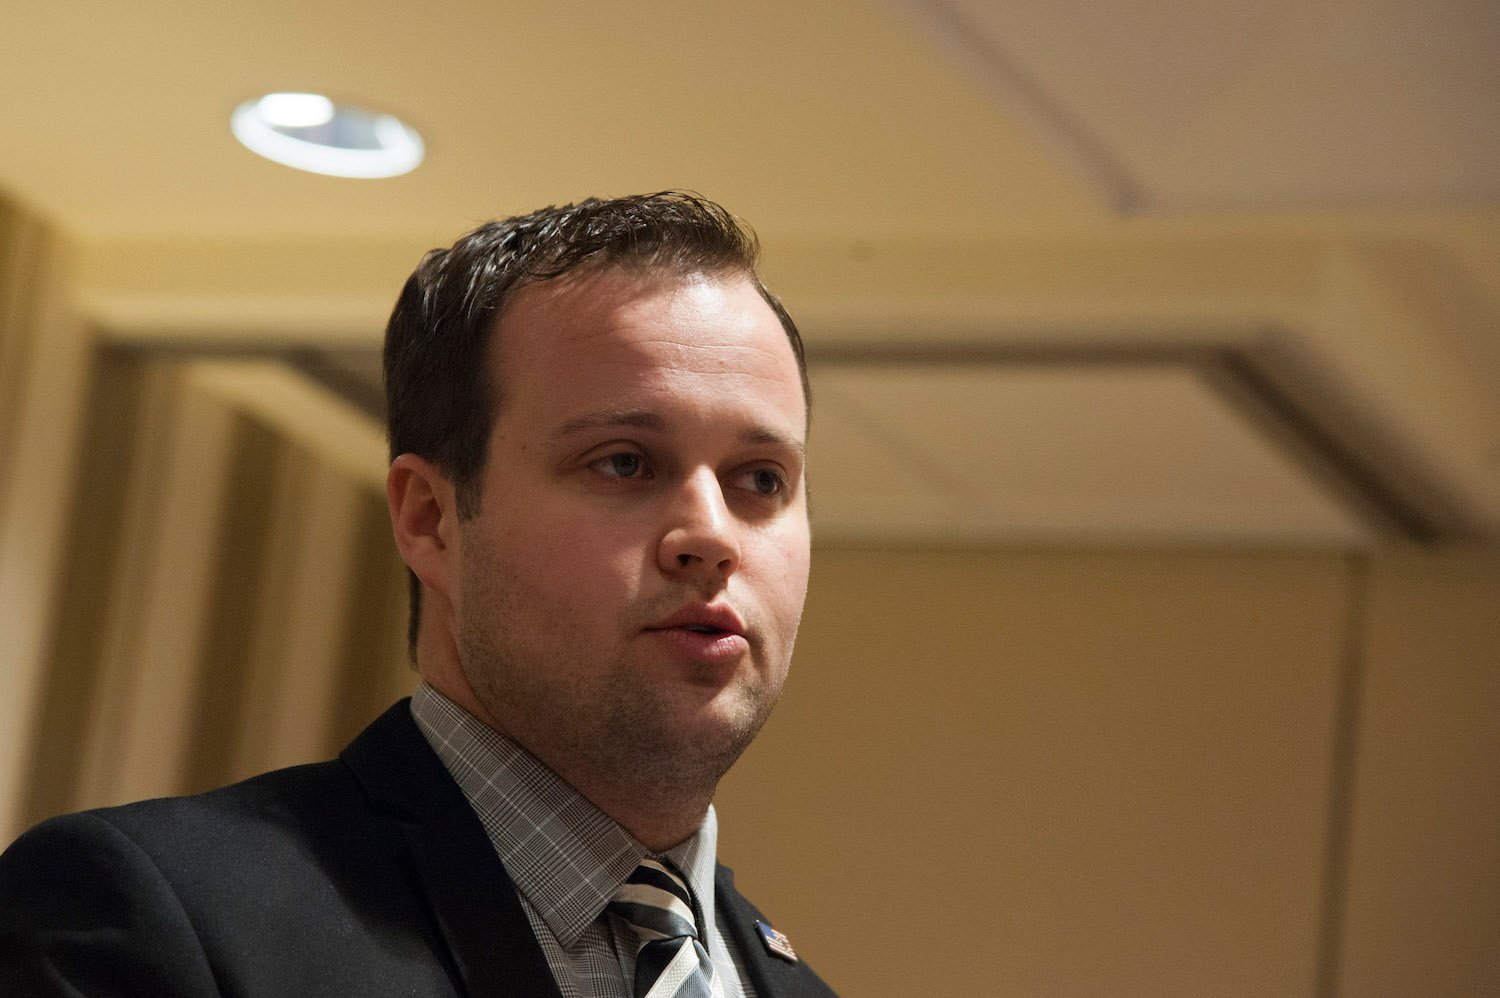 Josh Duggar of the Duggar family in a suit at an event